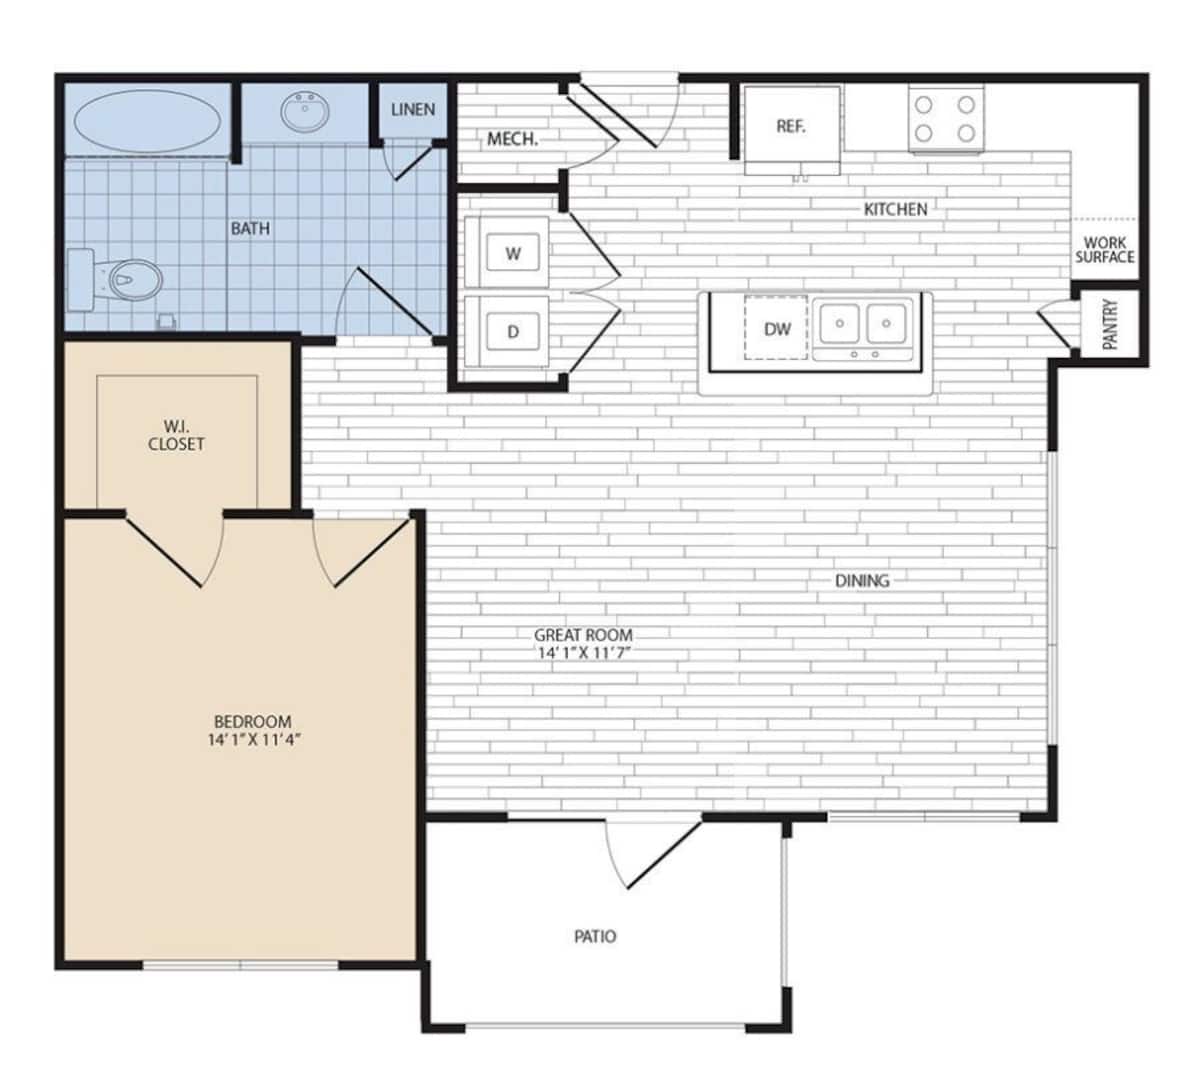 Floorplan diagram for A5a, showing 1 bedroom